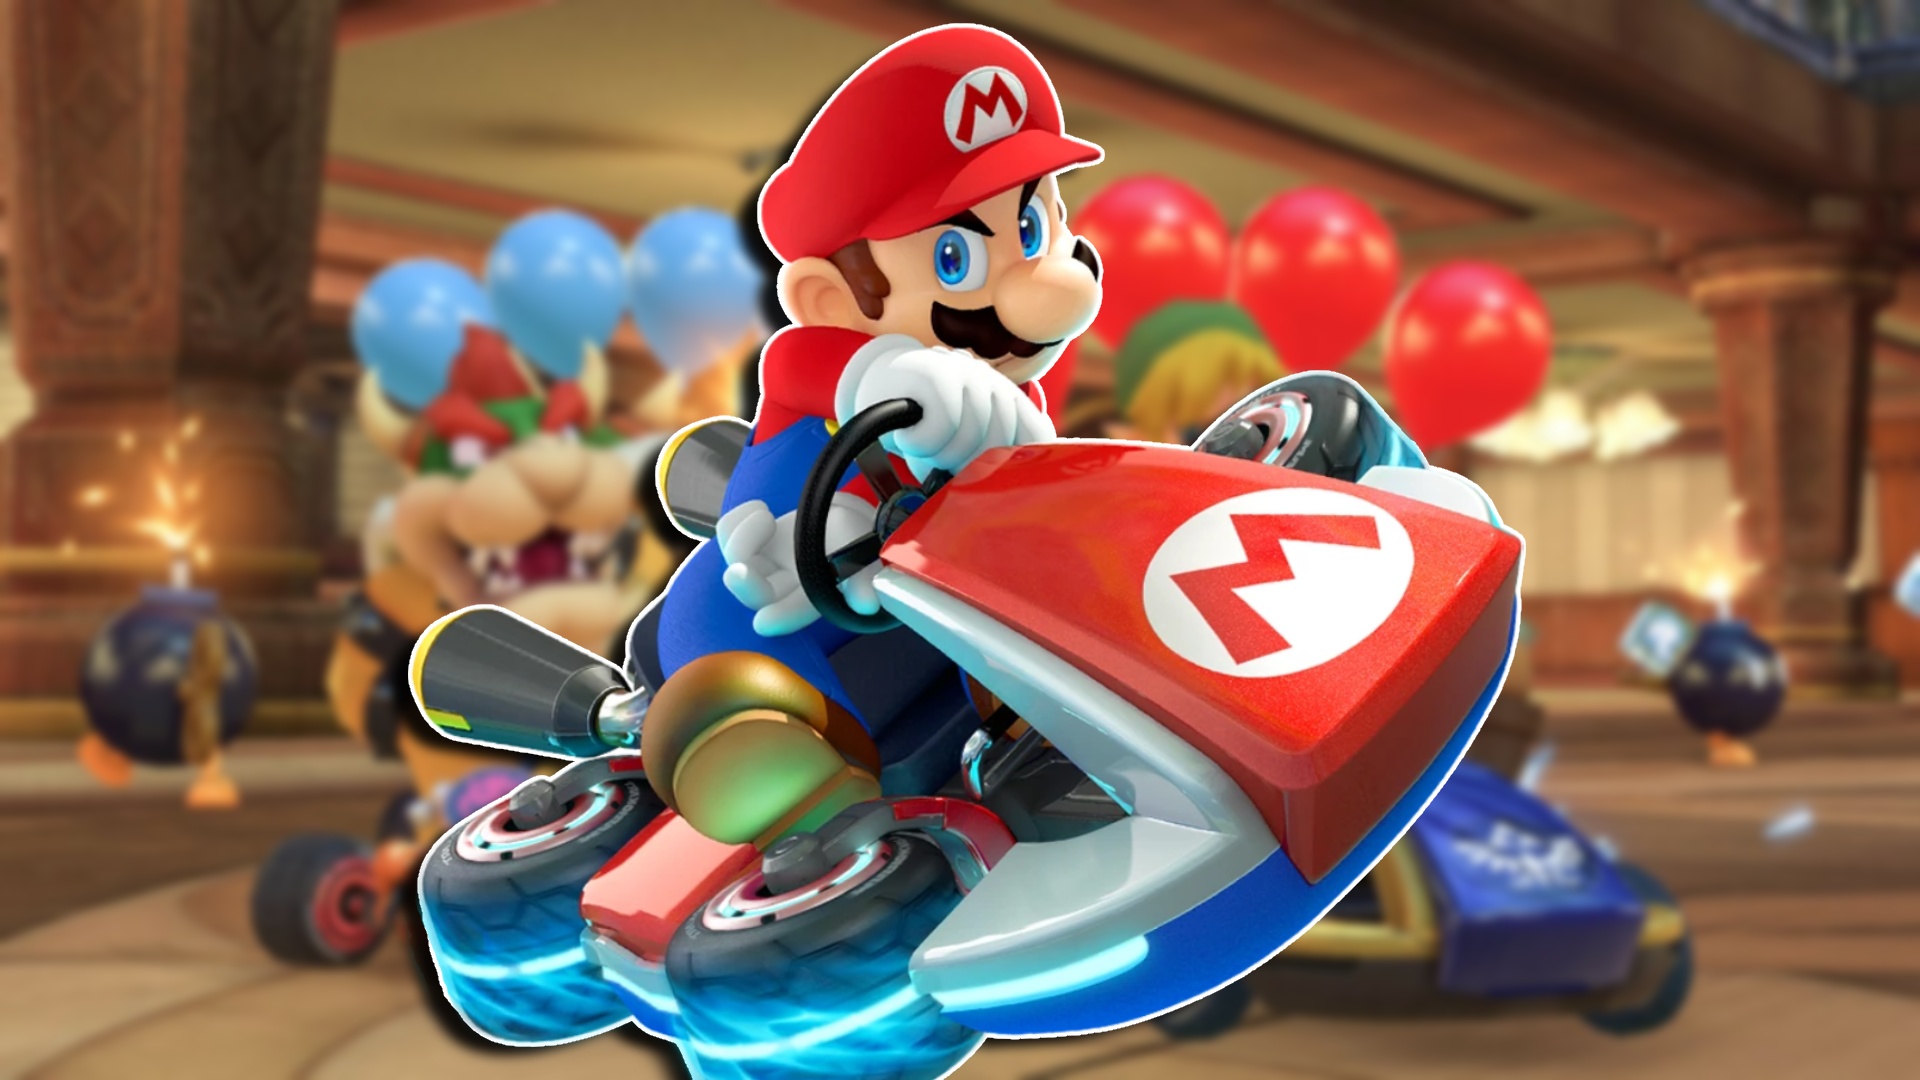 Why Mario Kart 8 Deluxe Is THE BEST Switch Game 